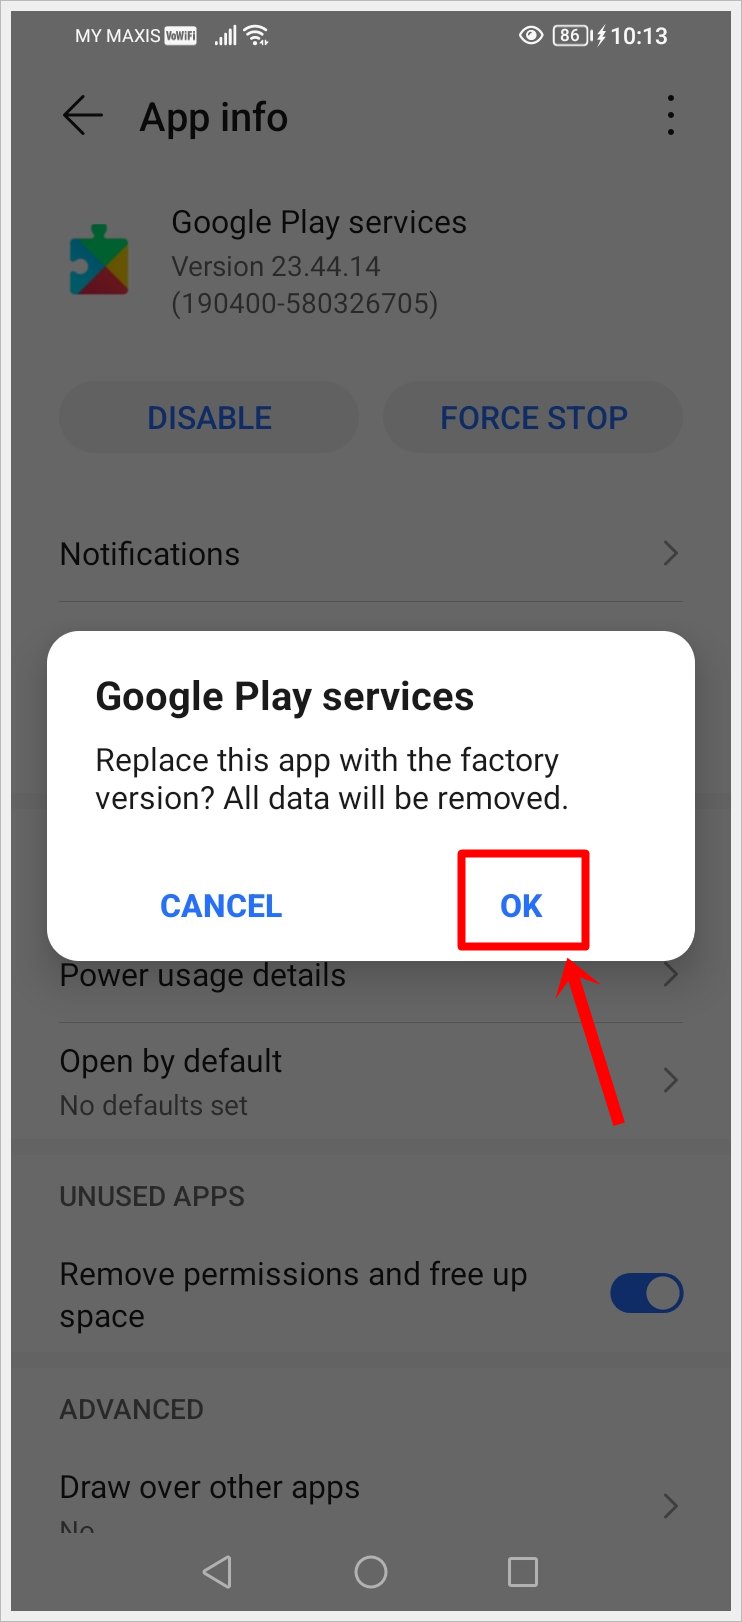 How to Fix "Google Play Services Keeps Stopping" Error: This image shows a confirmation alert for uninstalling updates in Google Play Services, and within that context, the "OK" option is highlighted.